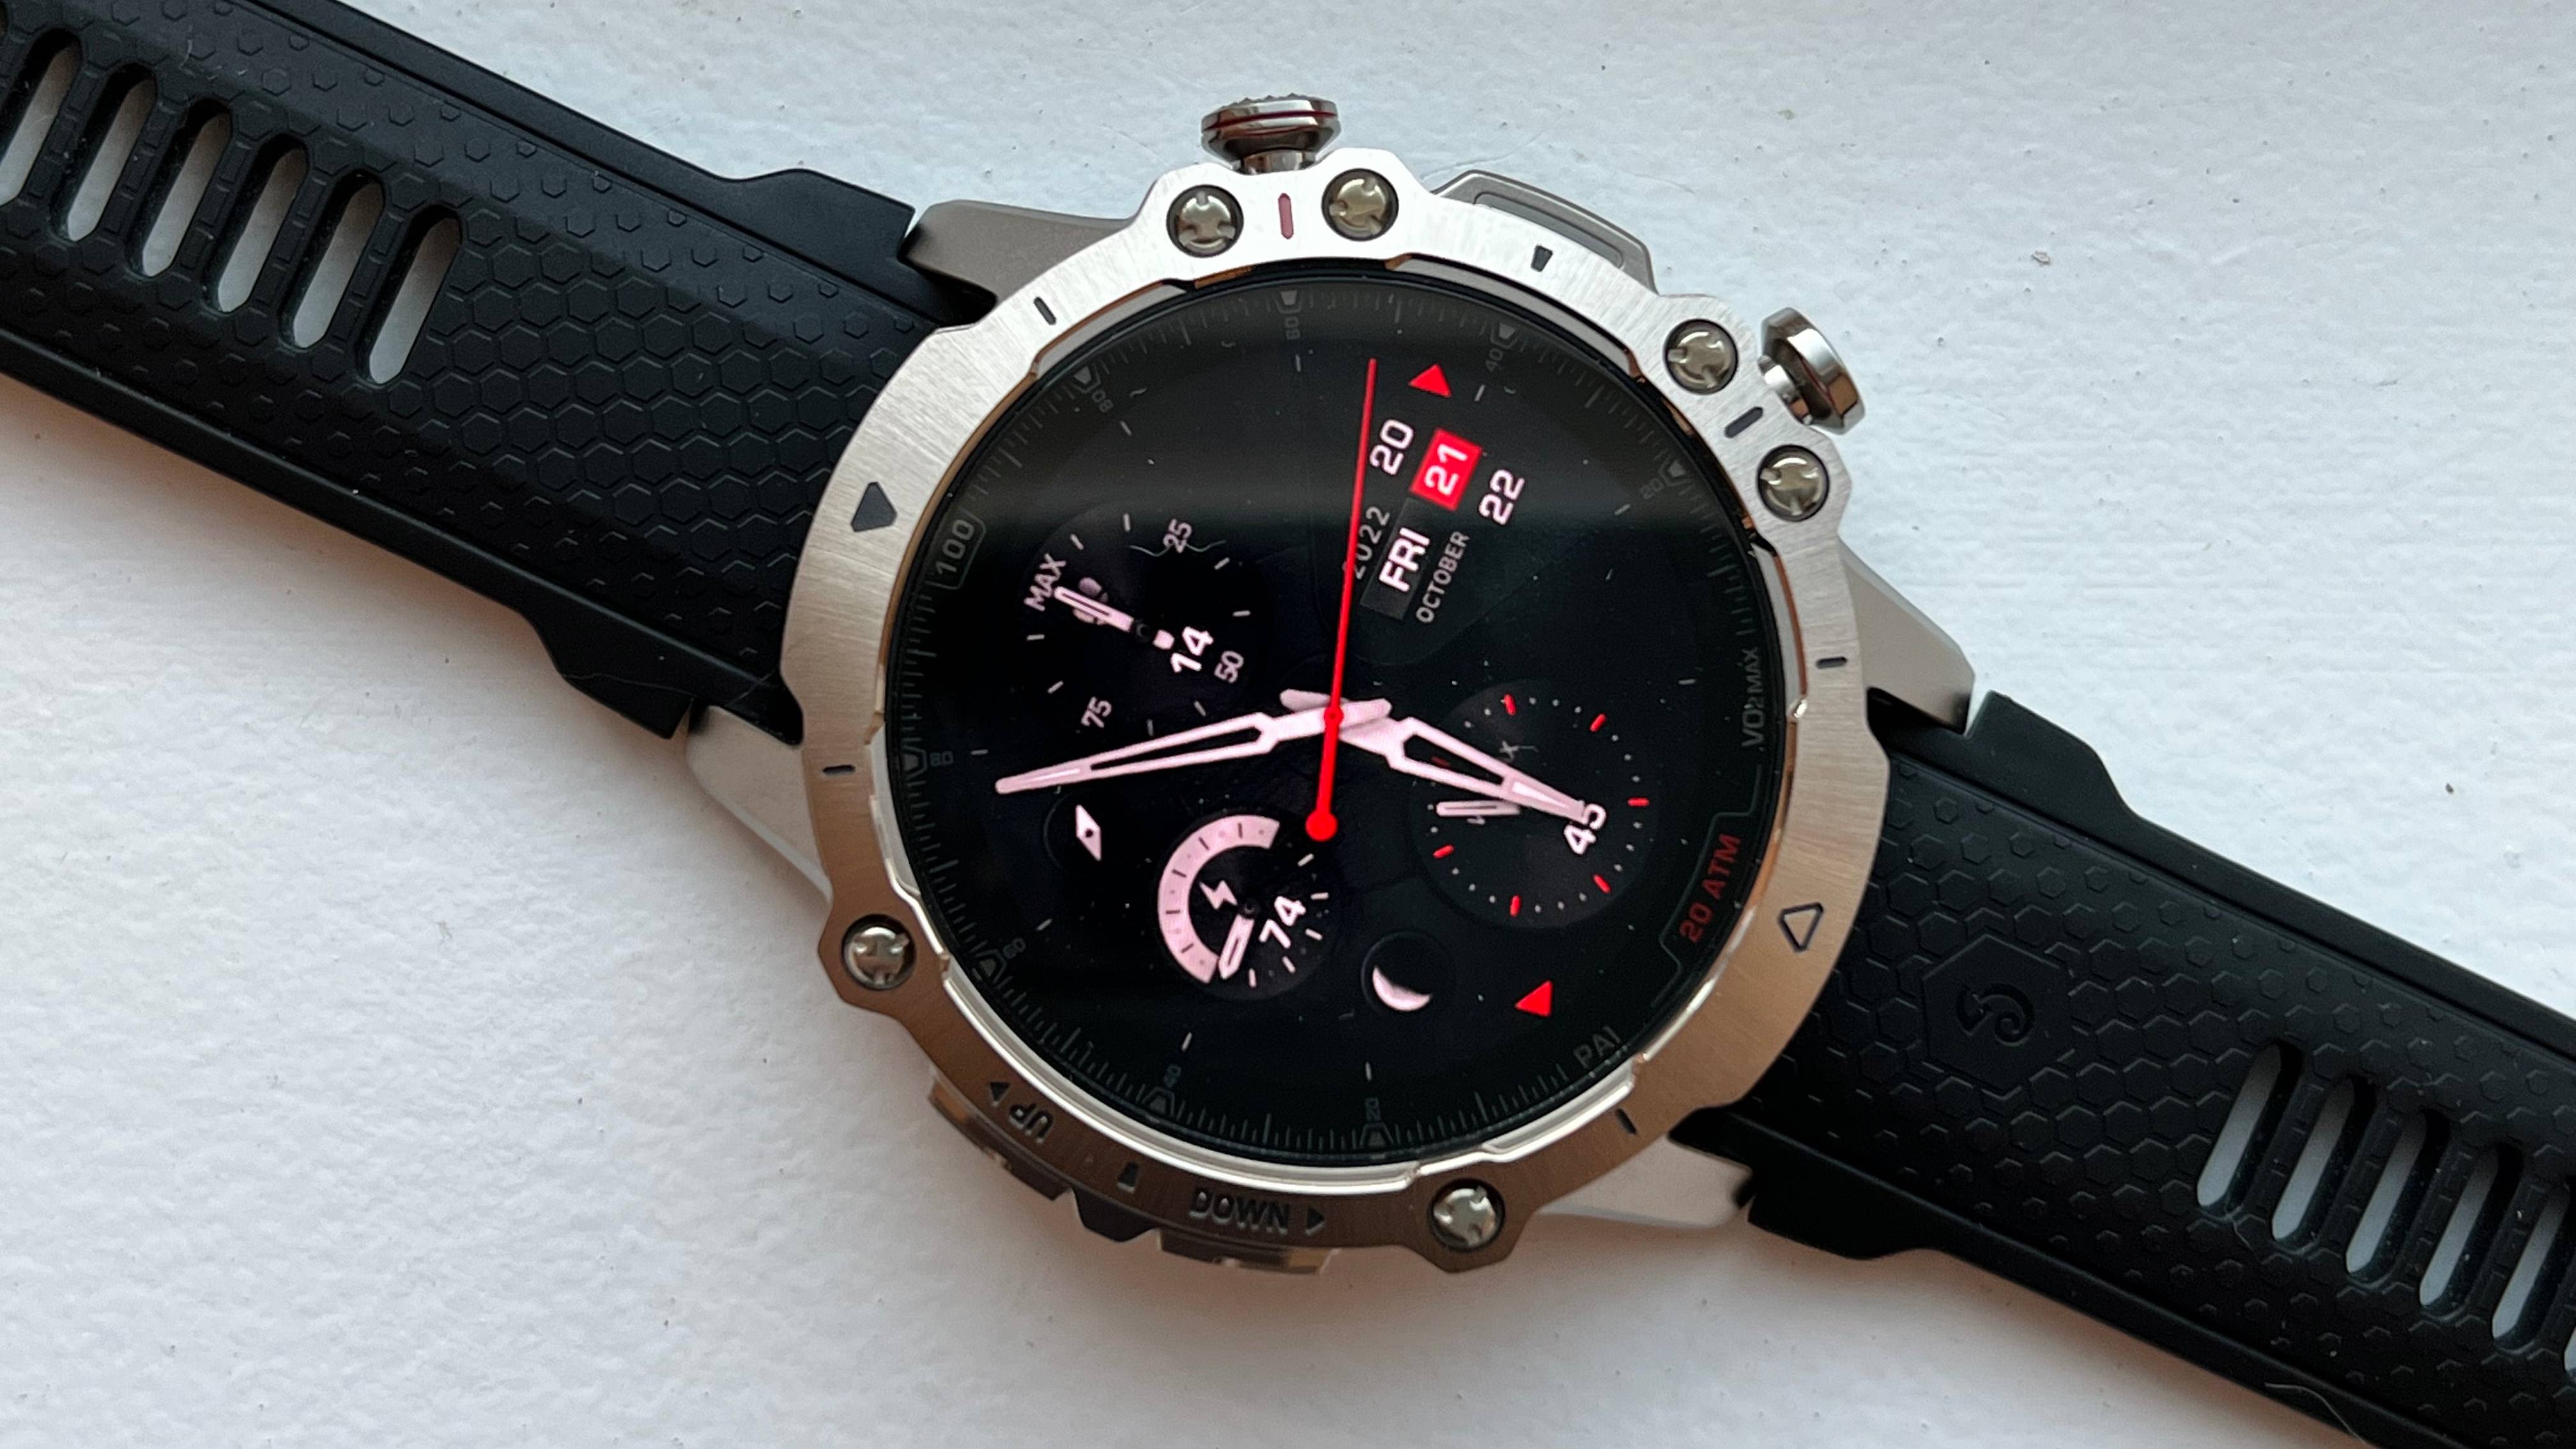 Amazfit falcon early review : r/amazfit